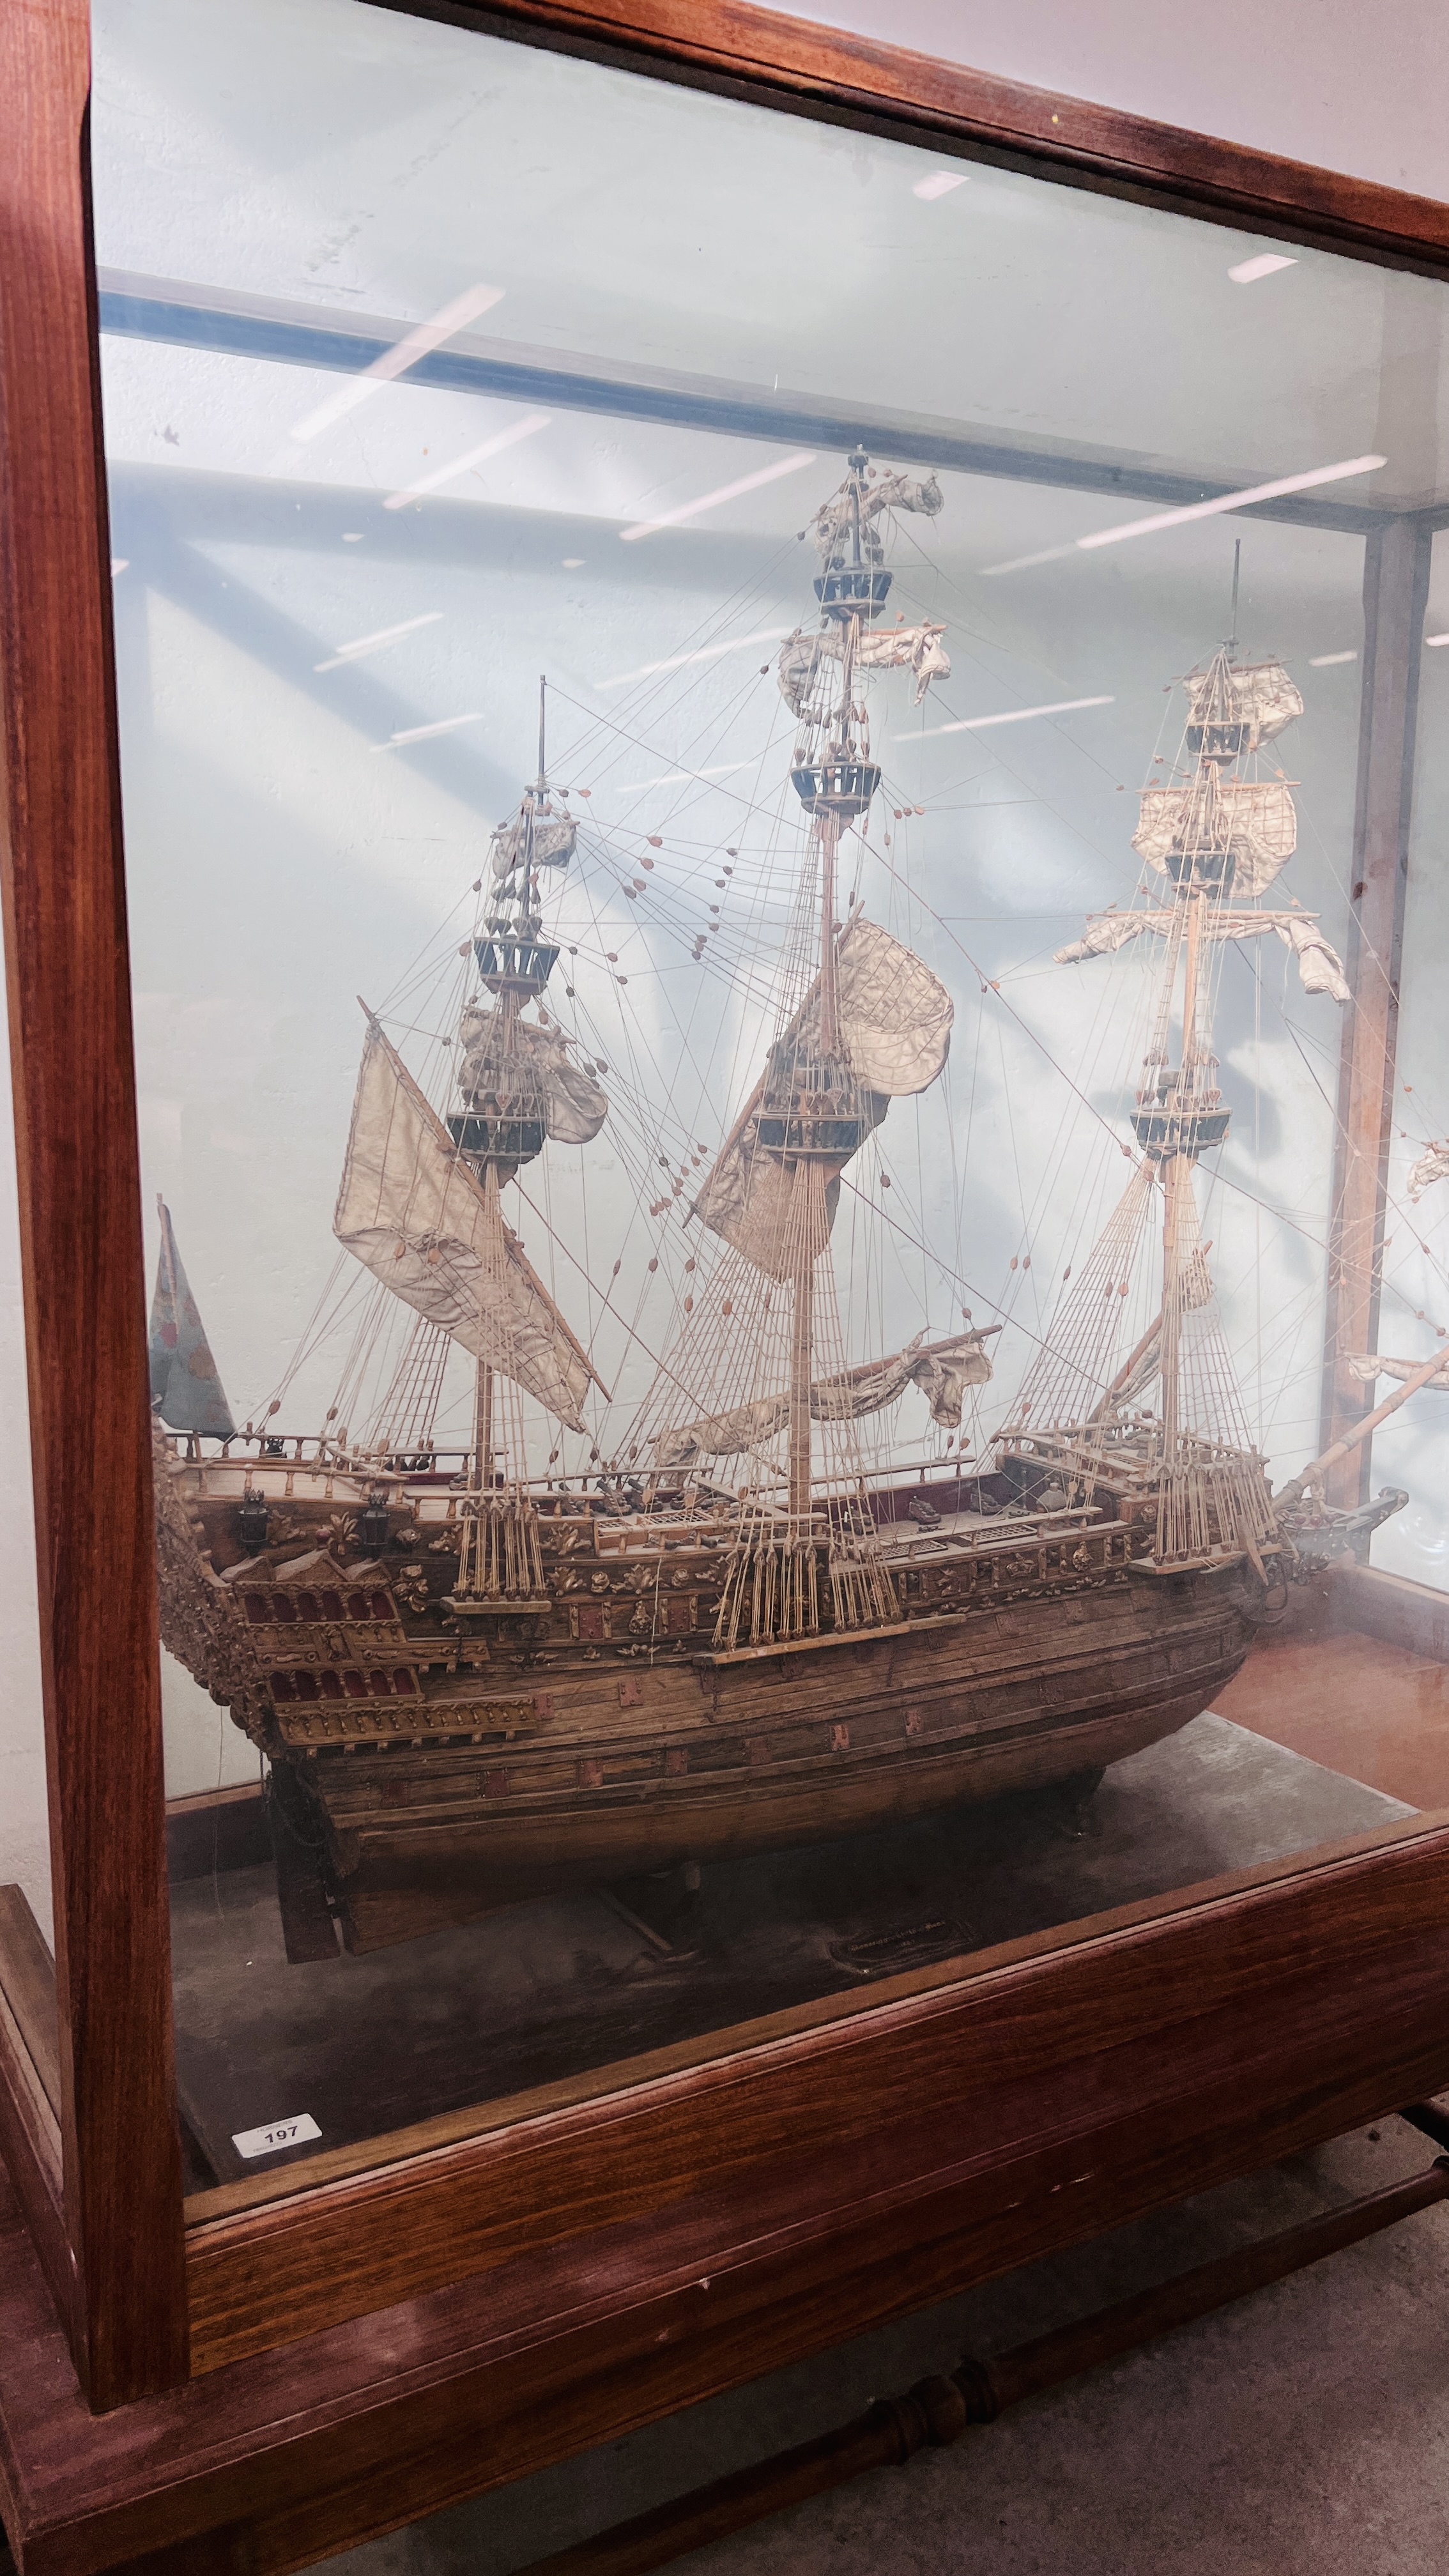 LARGE MODEL GALLEON "SOVEREIGN OF THE SEA" IN MAHOGANY DISPLAY CASE - W 128CM. D 55CM. H 146CM. - Image 11 of 15